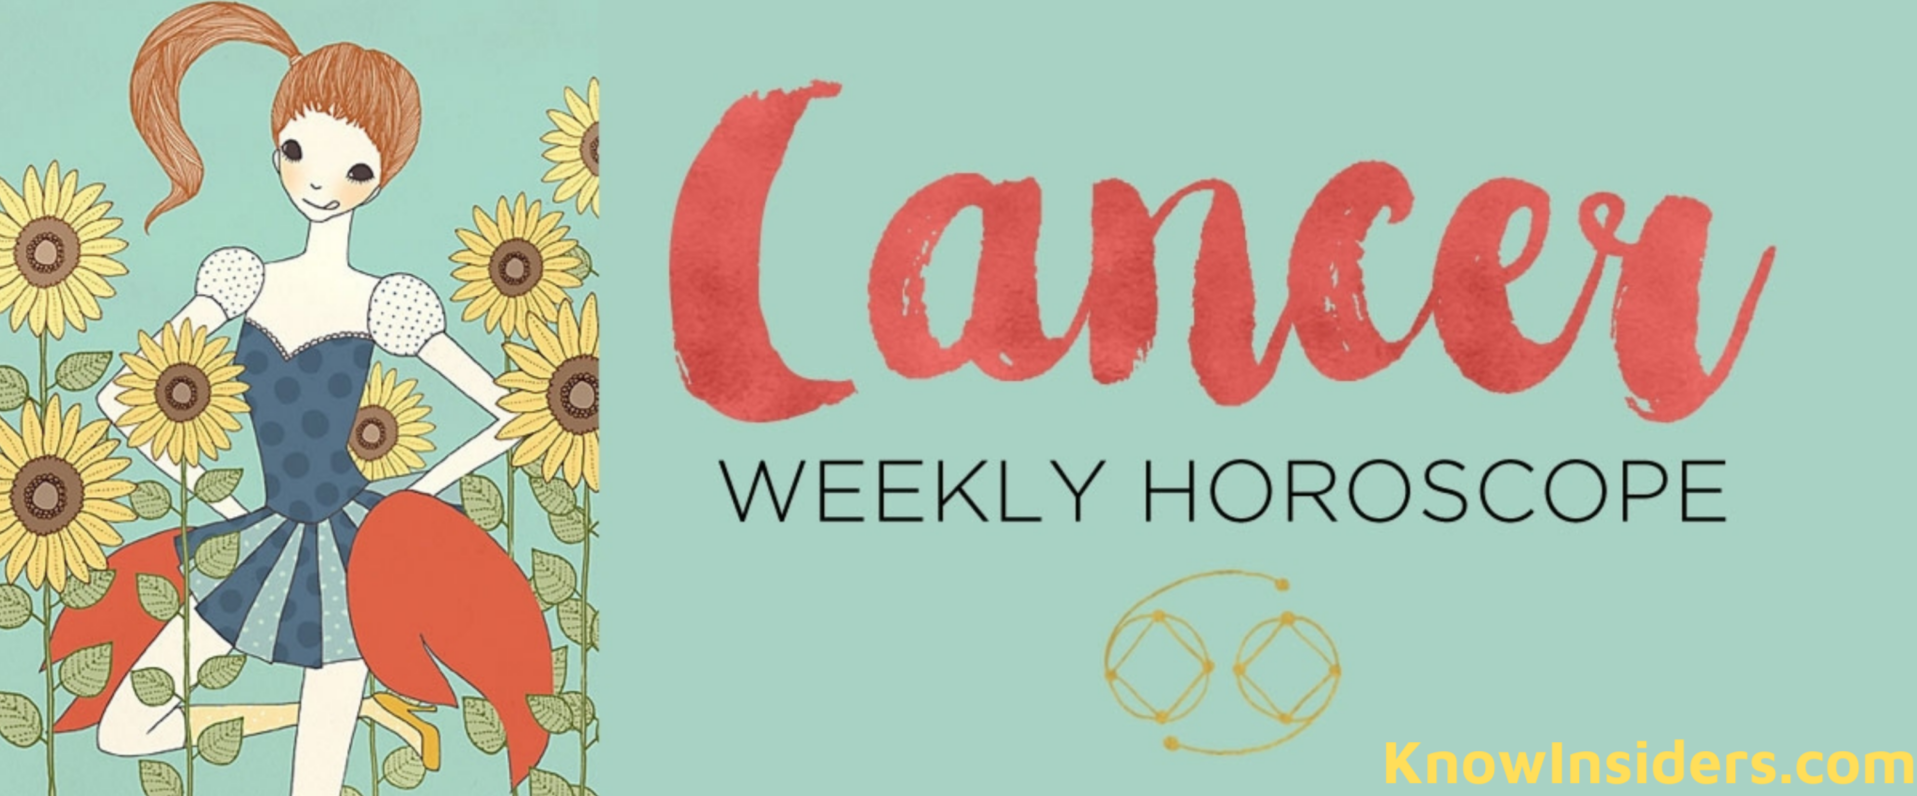 CANCER Weekly Horoscope (April 12 - 18): Astrological Predictions for Love, Financial, Career and Health